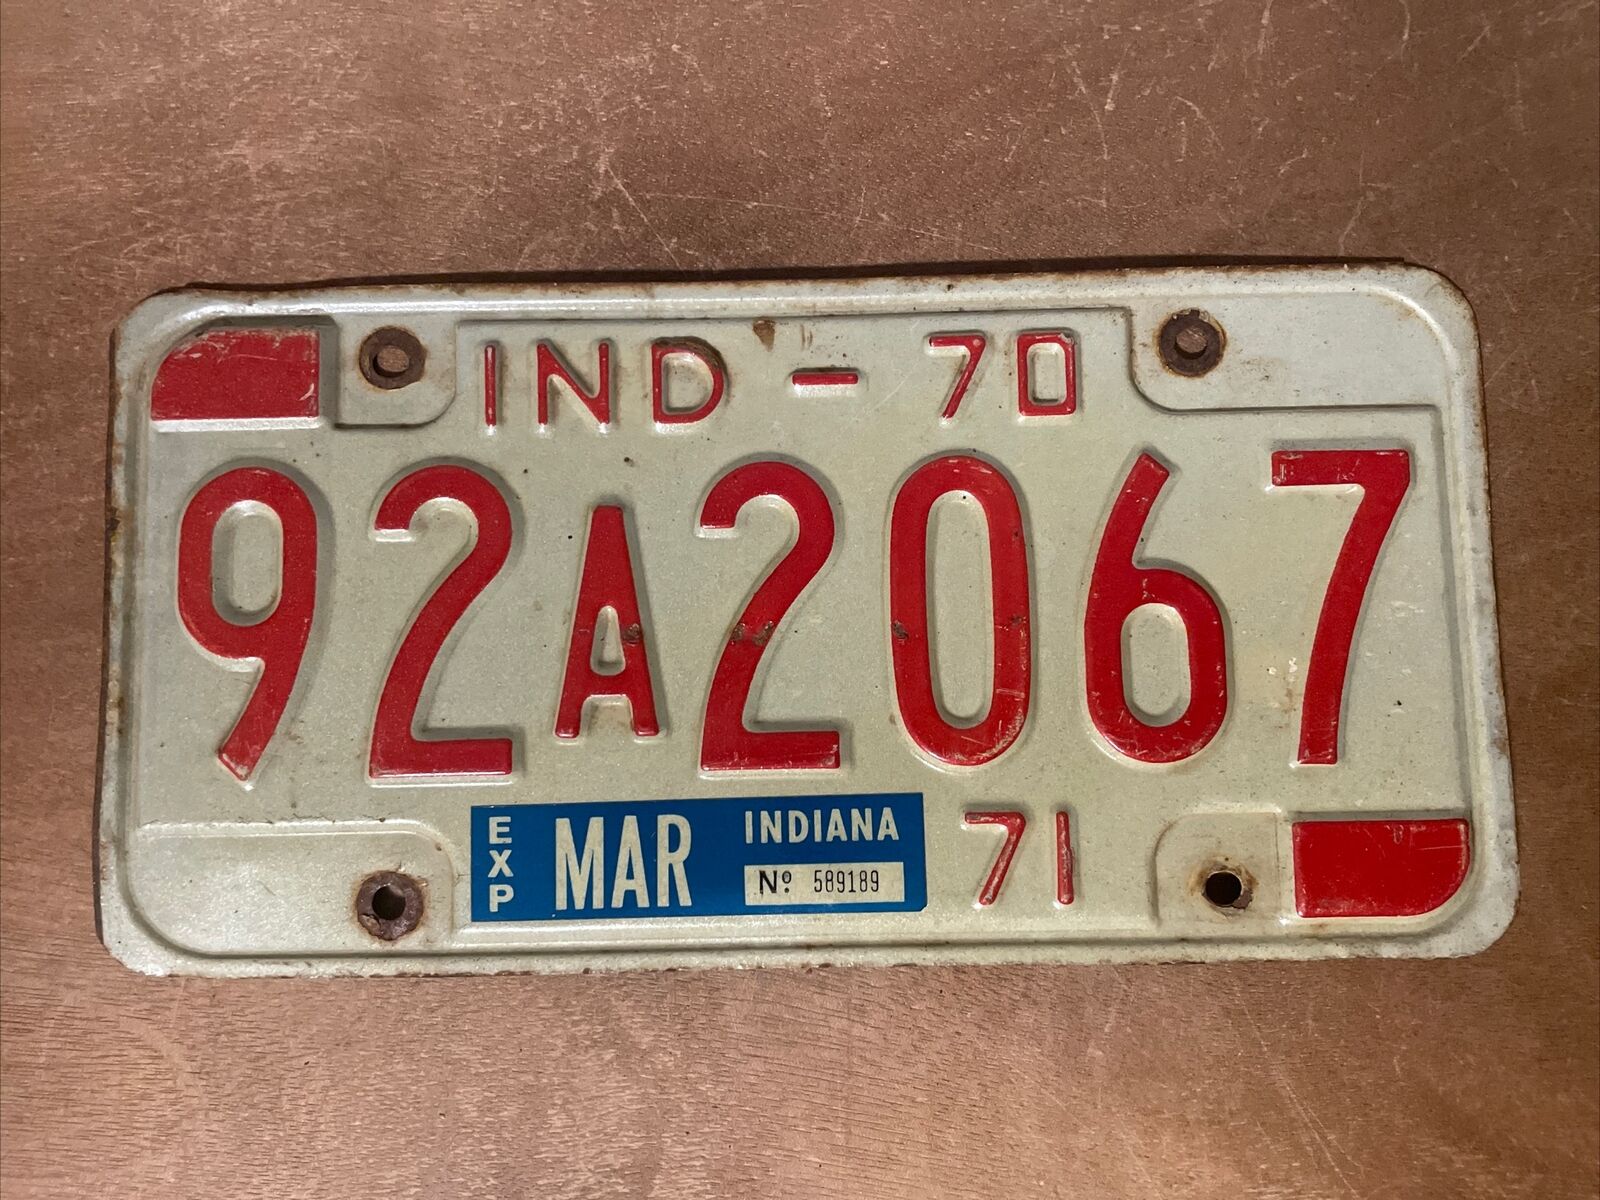 1970 1971 Indiana License Plate # 92 A 2067 Whitley County